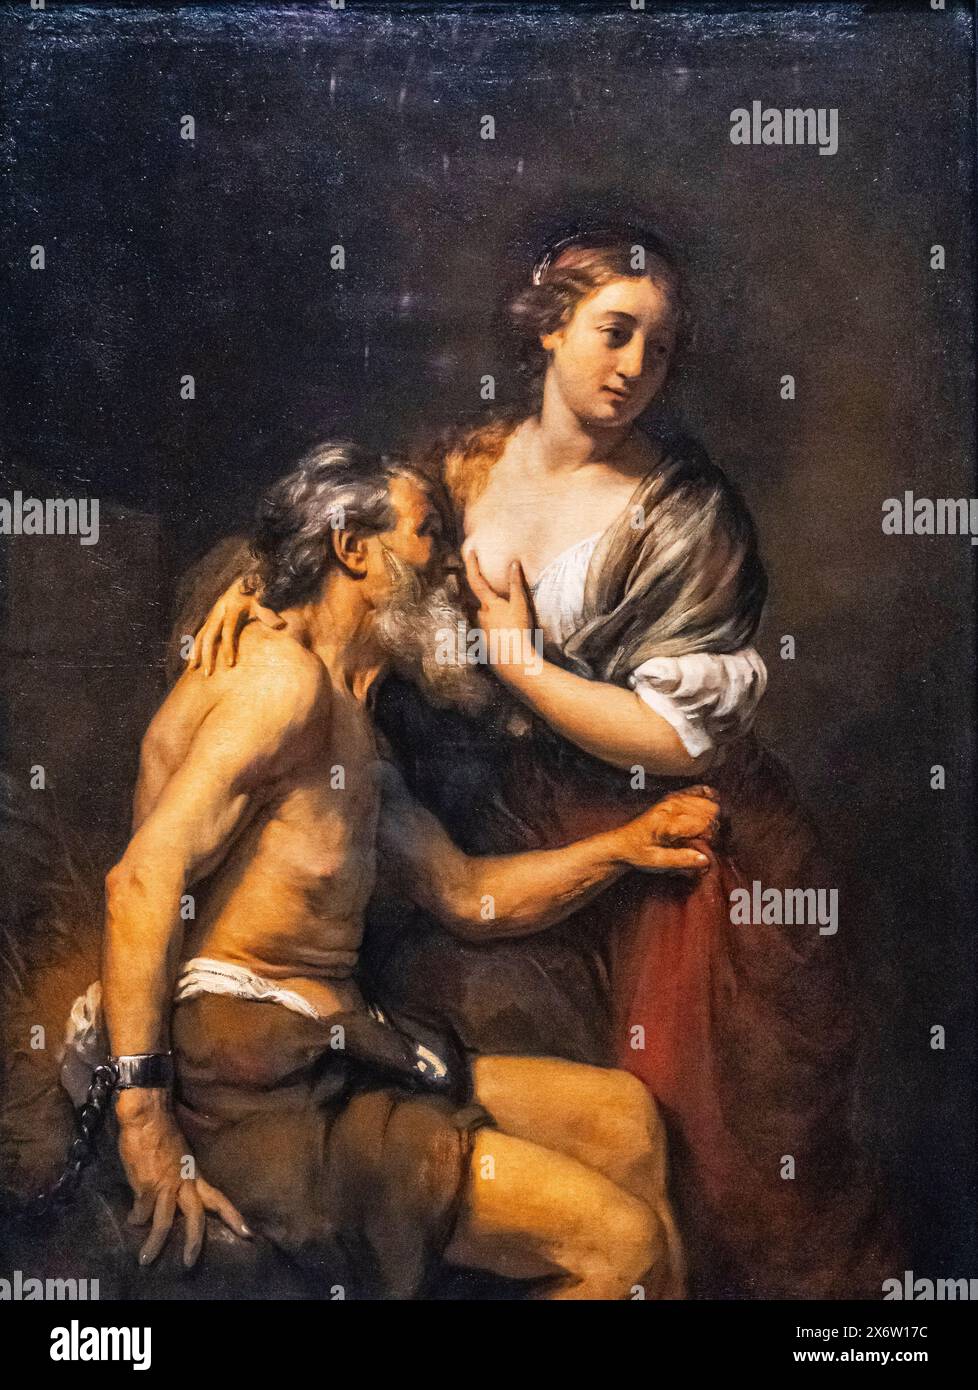 Cimon and Pero, at. Willlem Drost, oil on canvas, 1656-57, Amsterdam, Netherlands. Stock Photo